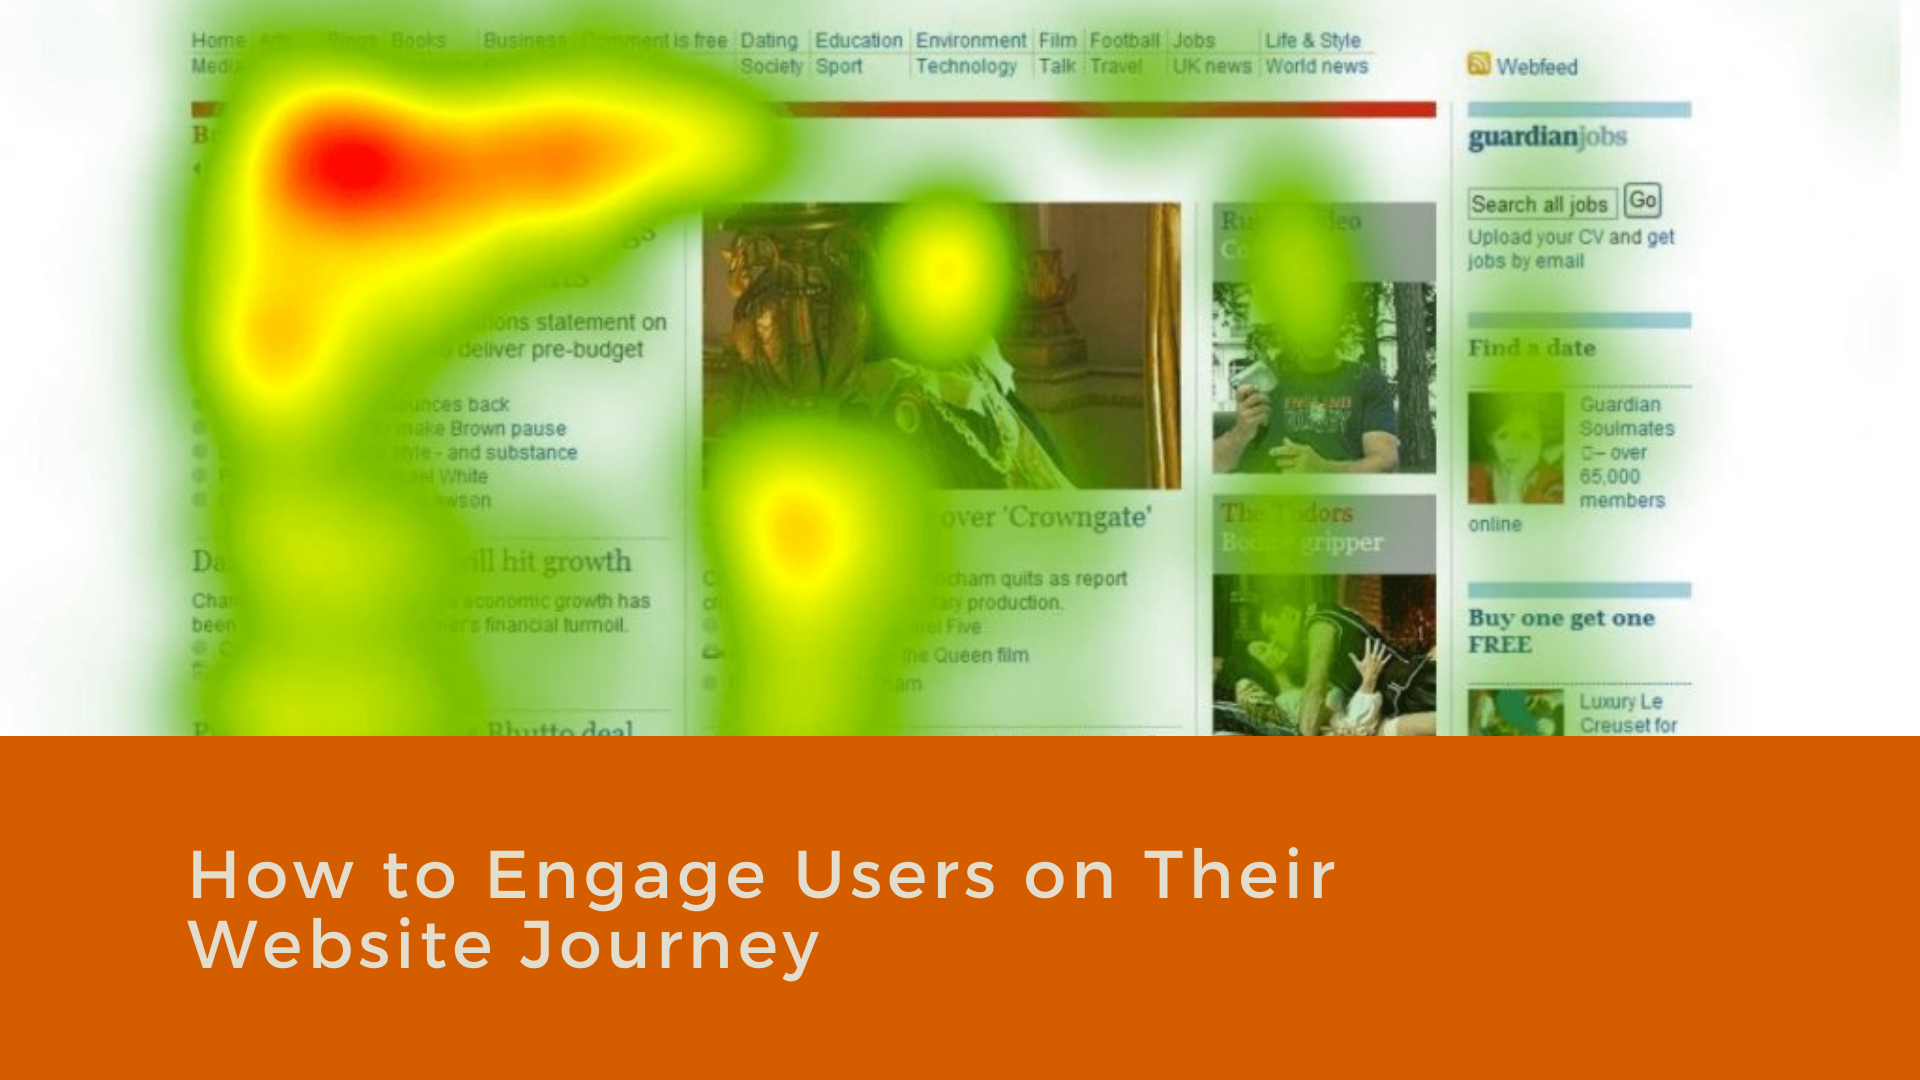 How to Engage Users on Their Website Journey